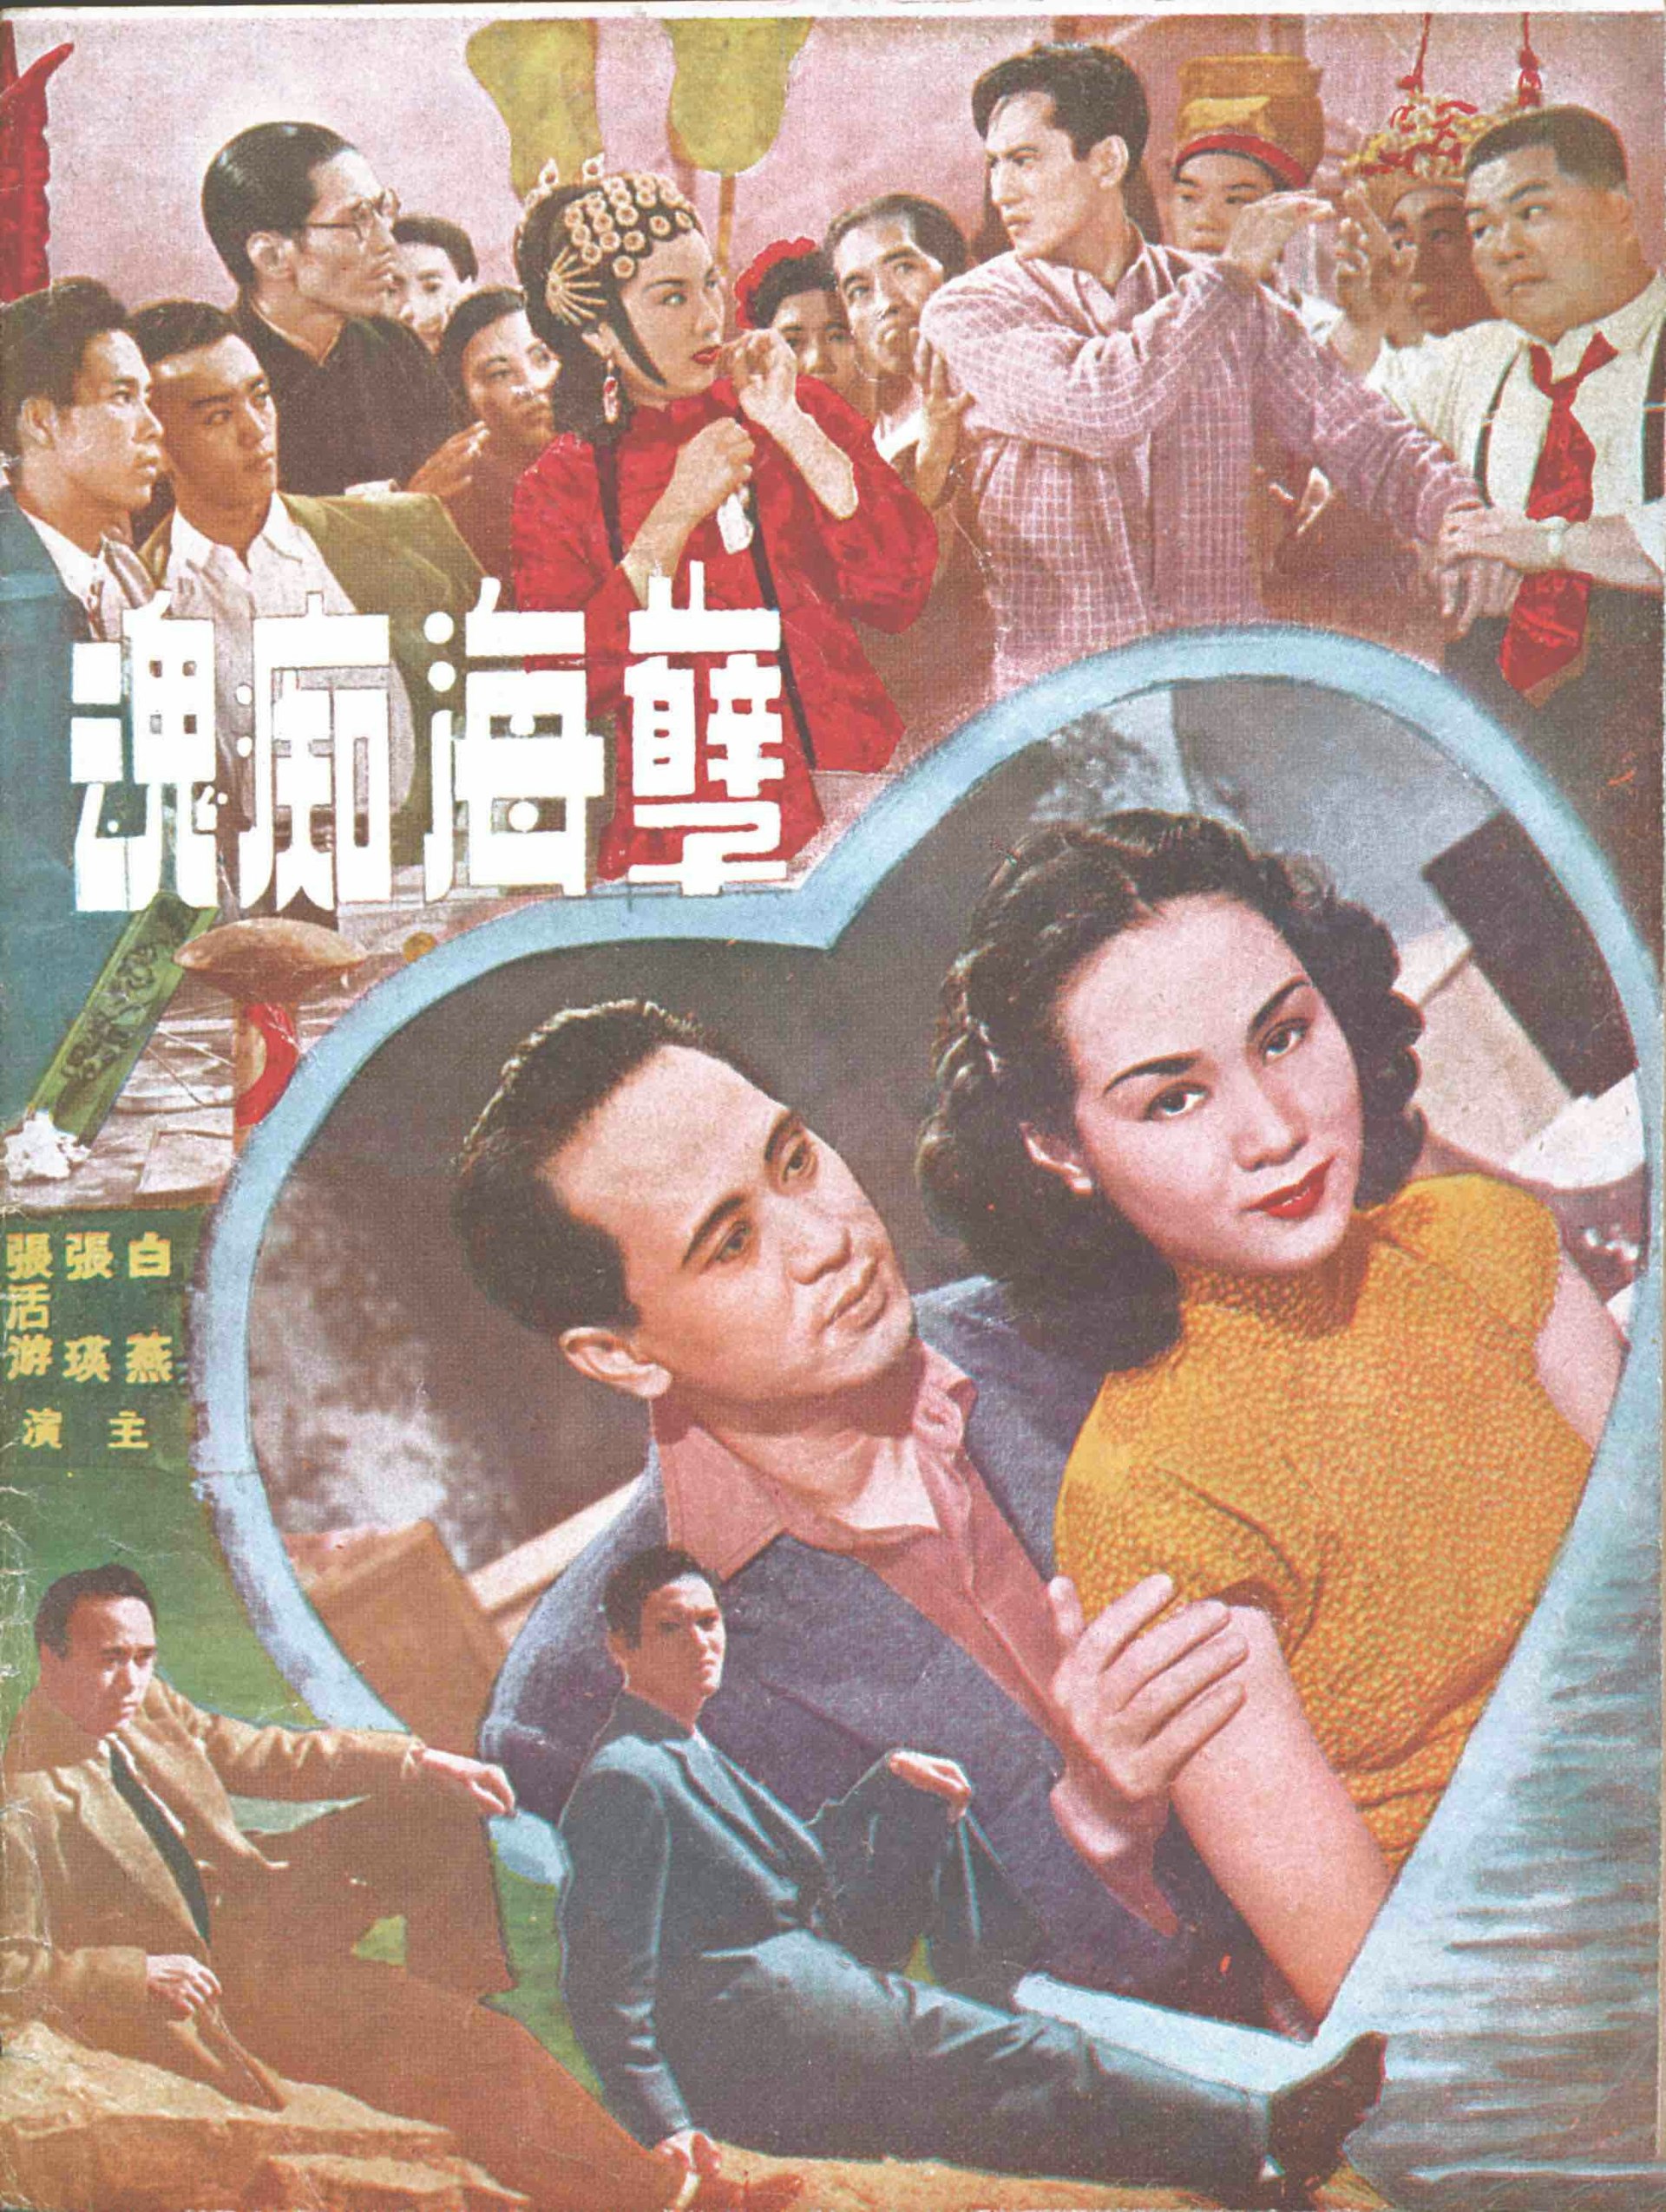 Vintage movie mags from the golden age of Chinese cinema